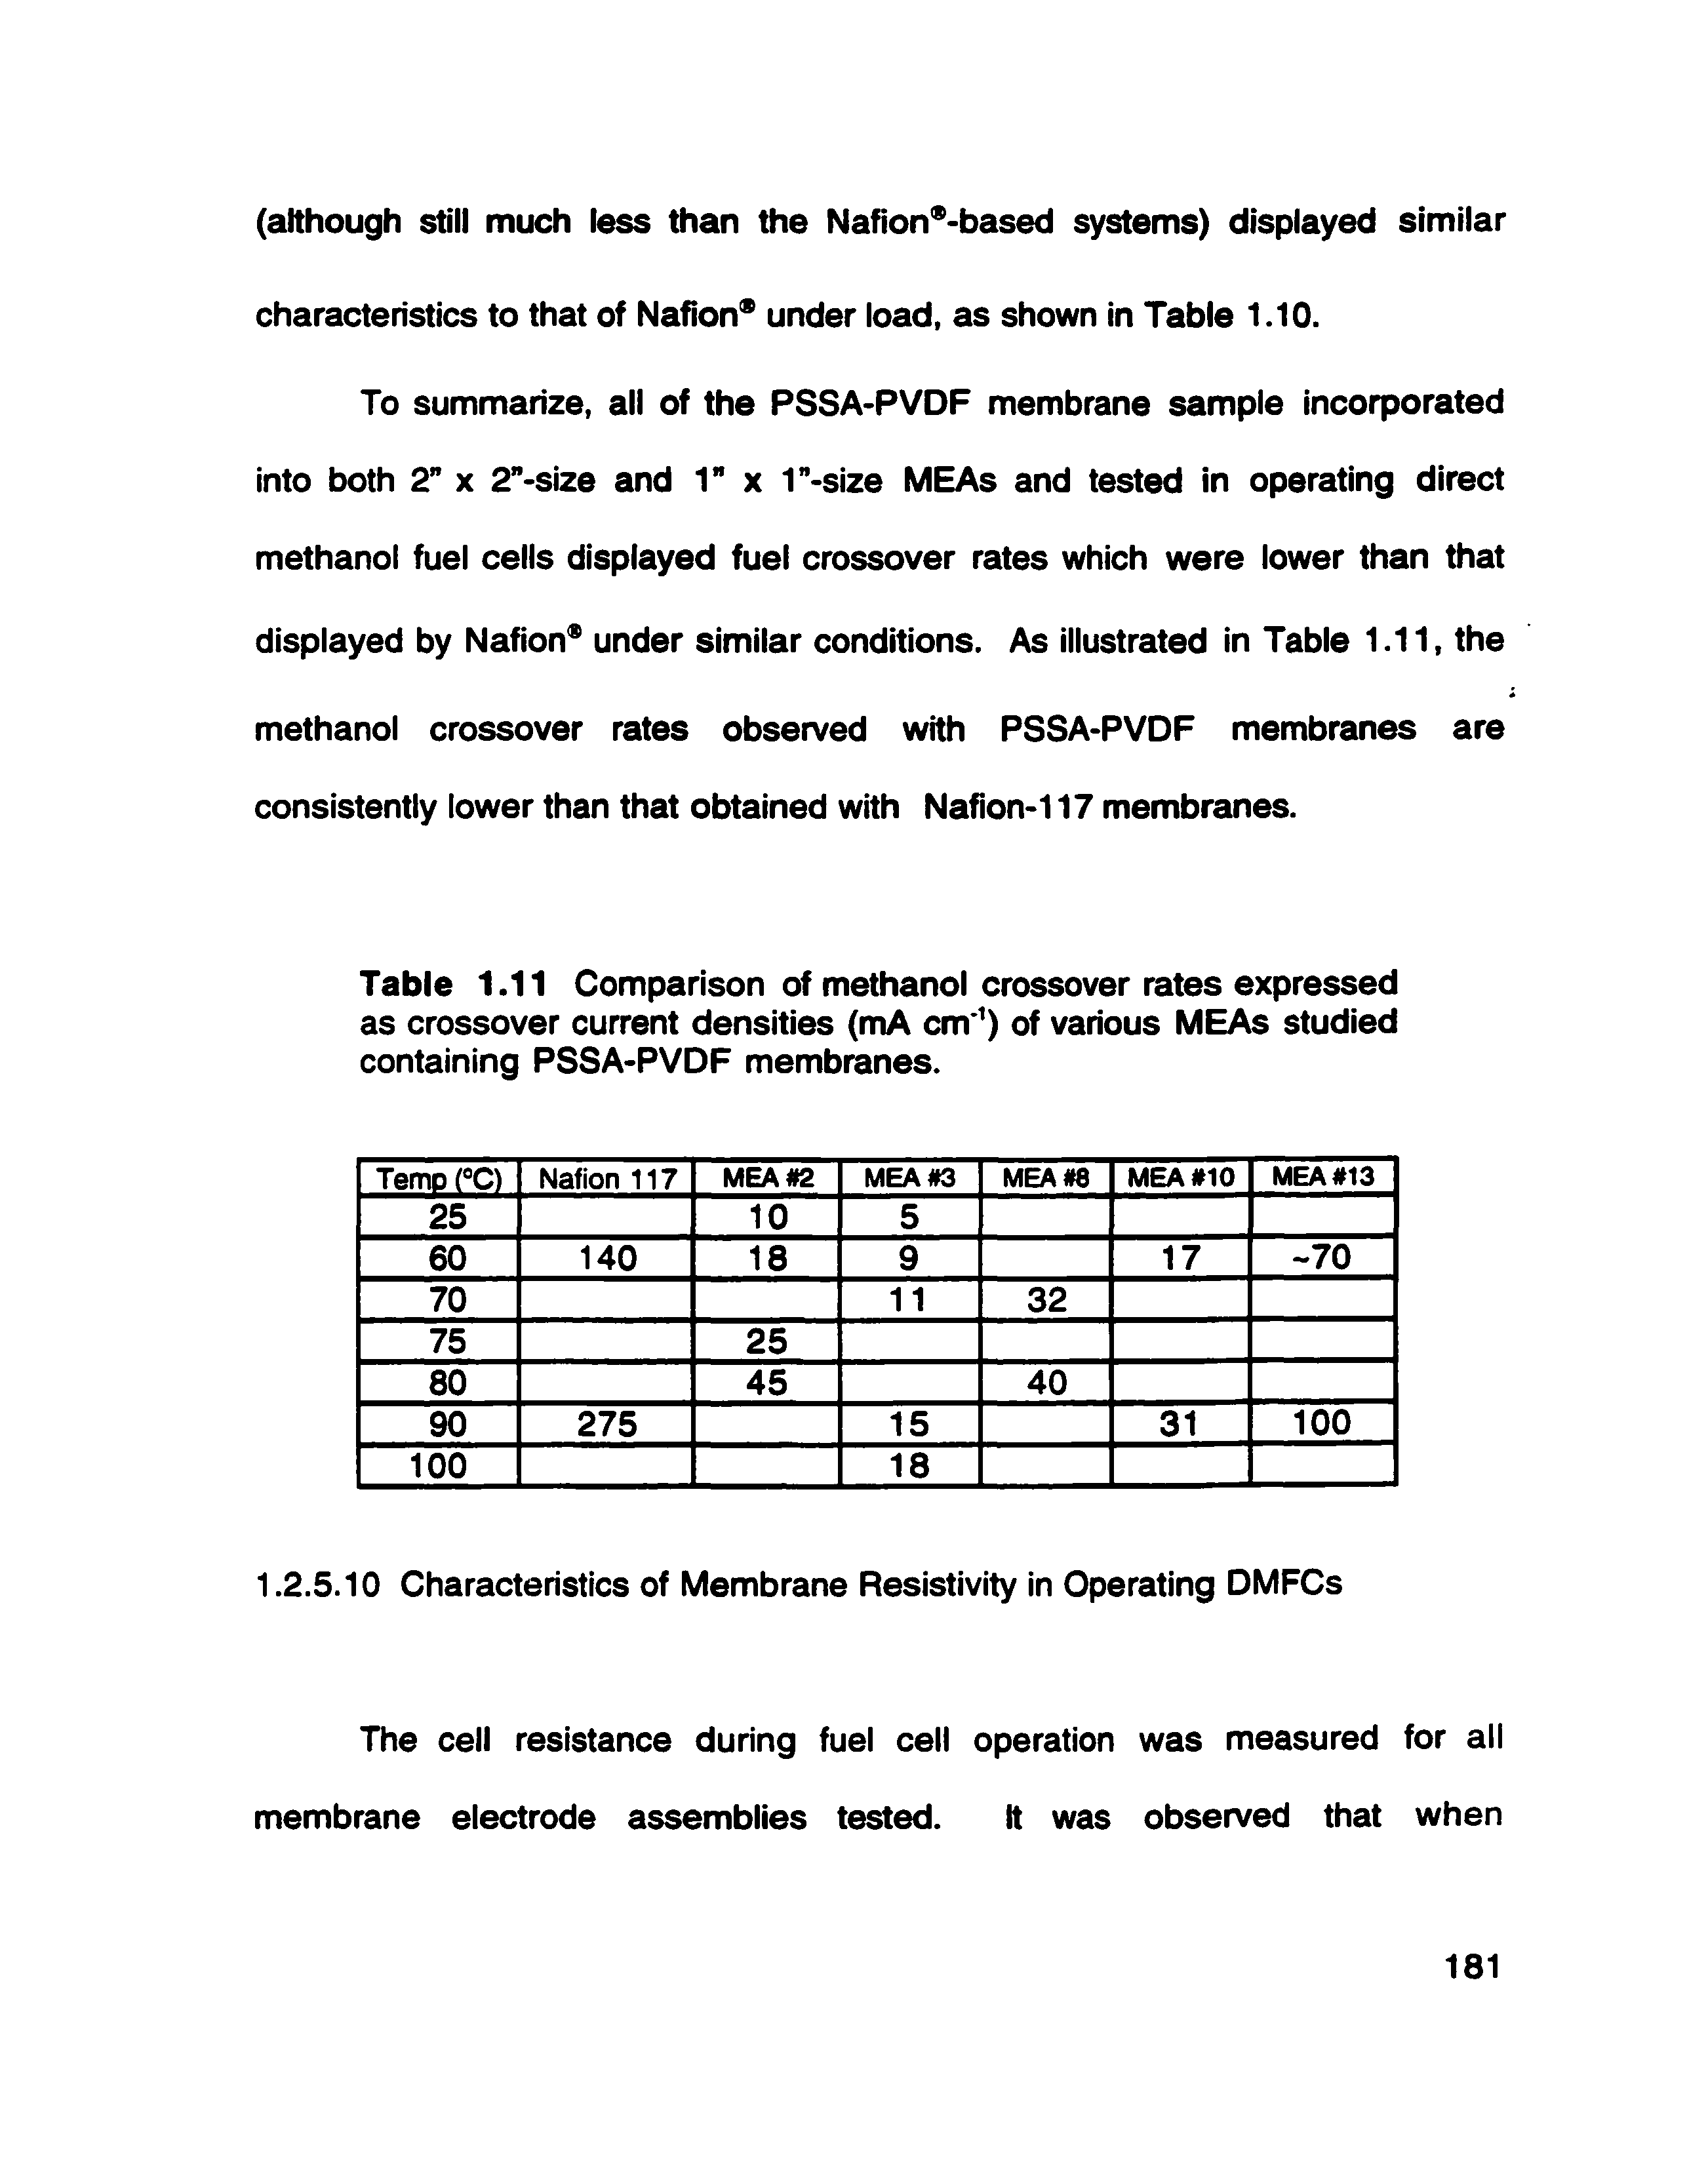 Table 1.11 Comparison of methanol crossover rates expressed as crossover current densities (mA cm ) of various MEAs studied containing PSSA-PVDF membranes.